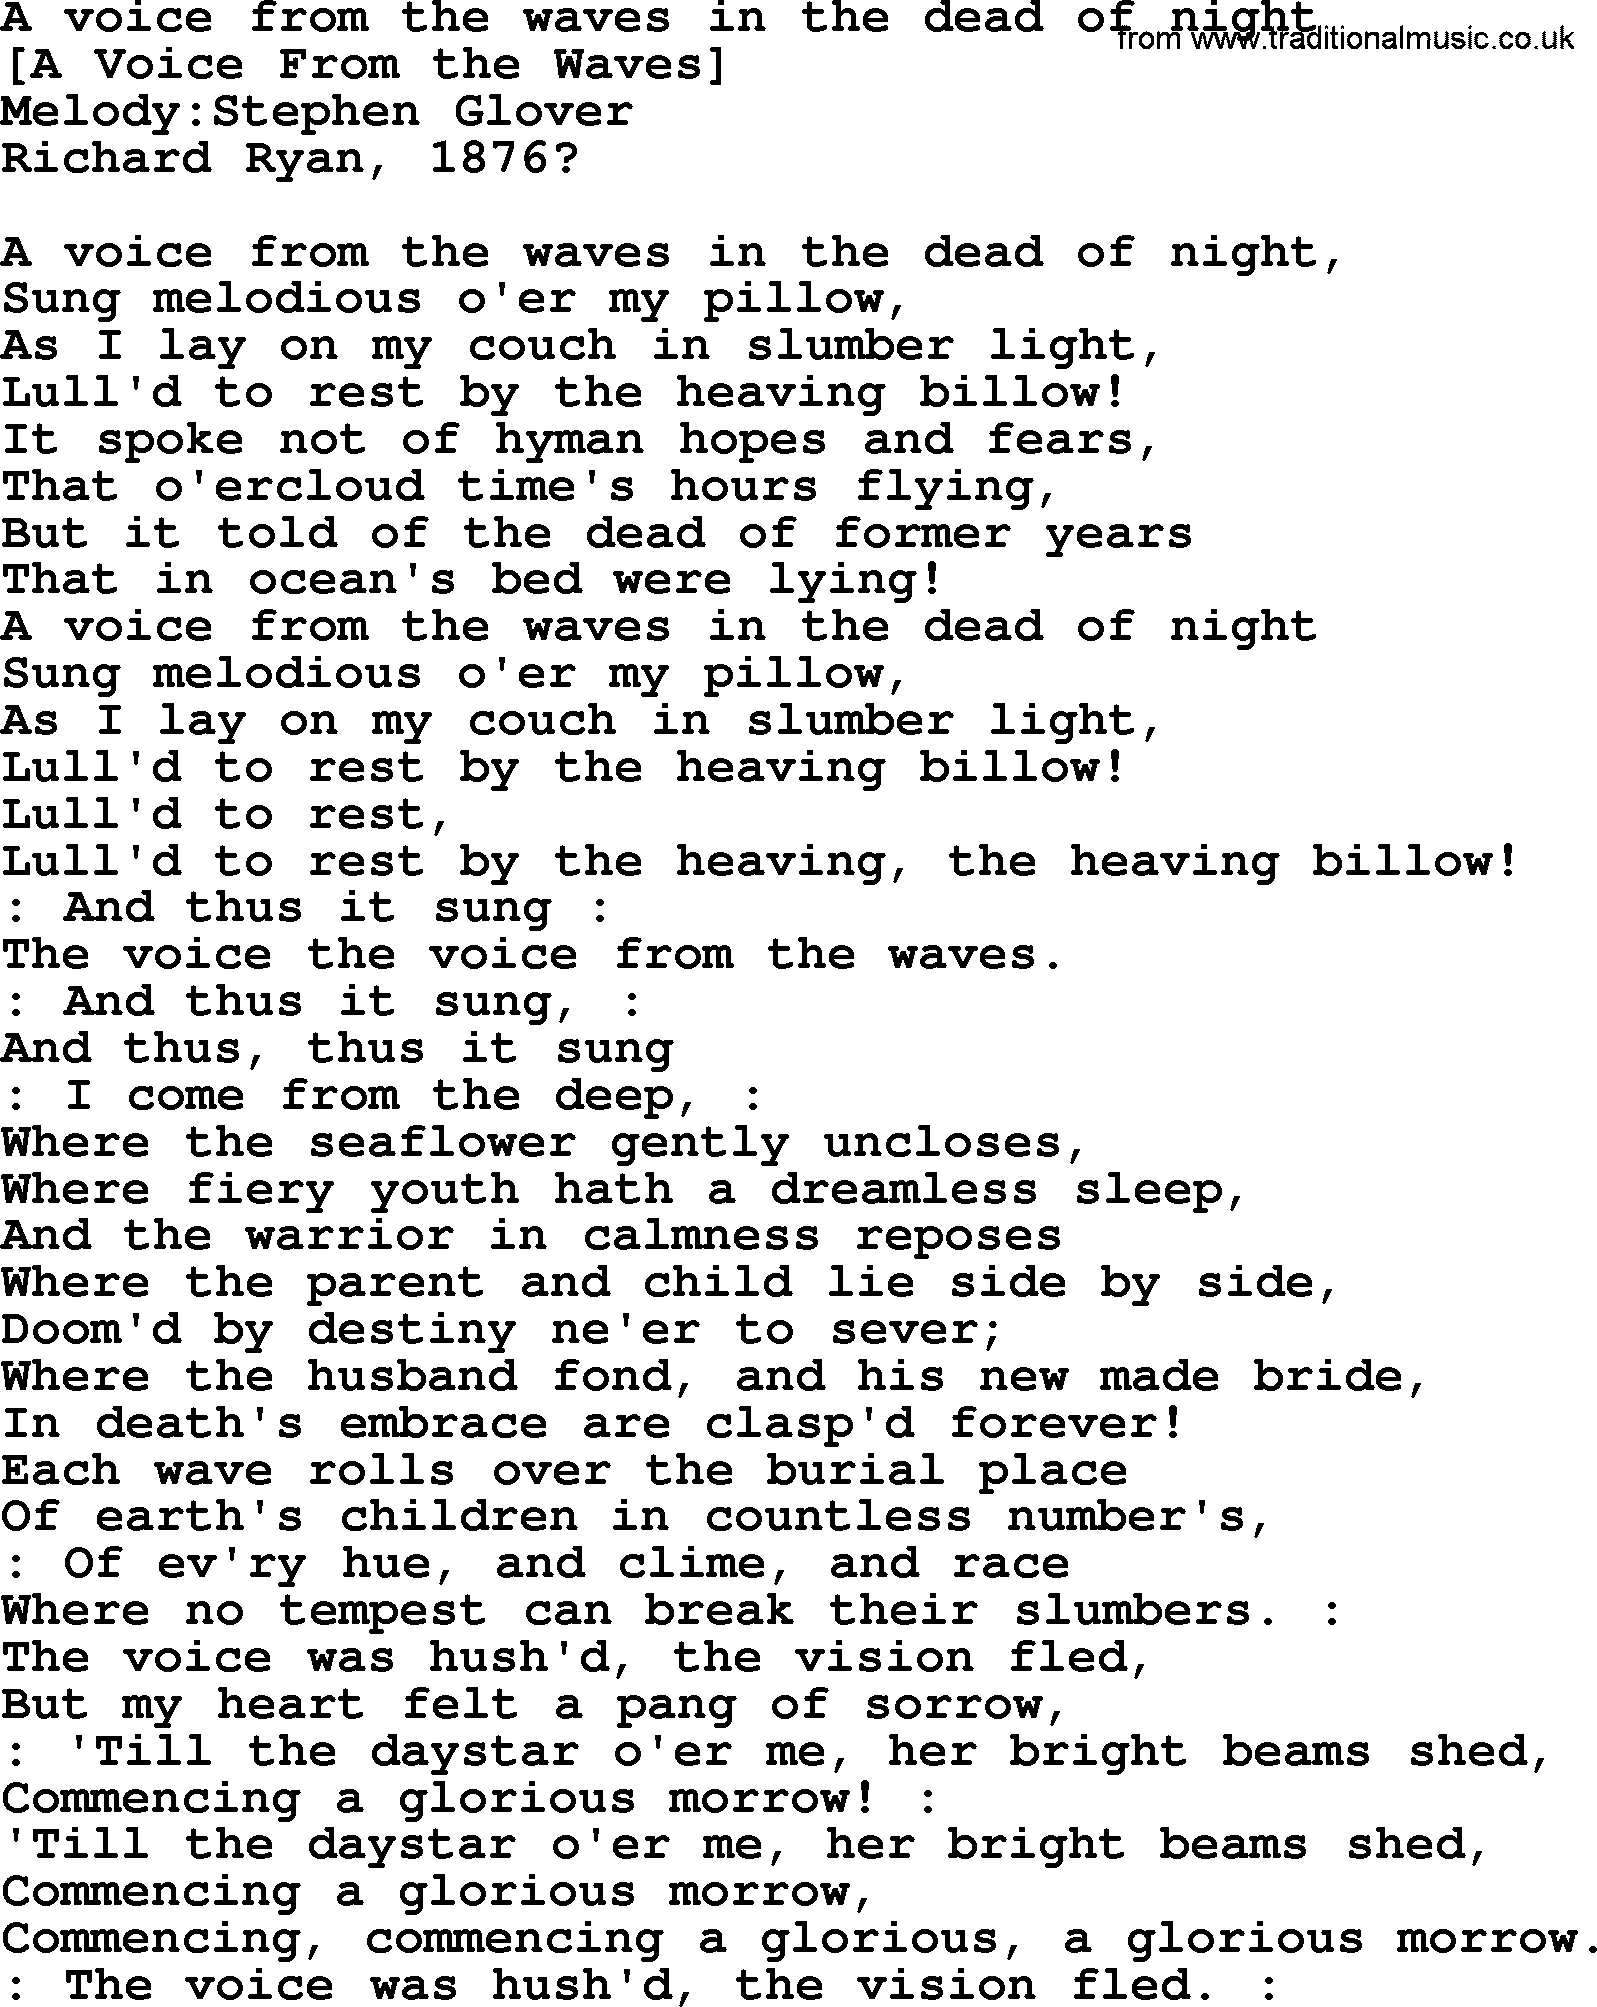 Old American Song: A Voice From The Waves In The Dead Of Night, lyrics